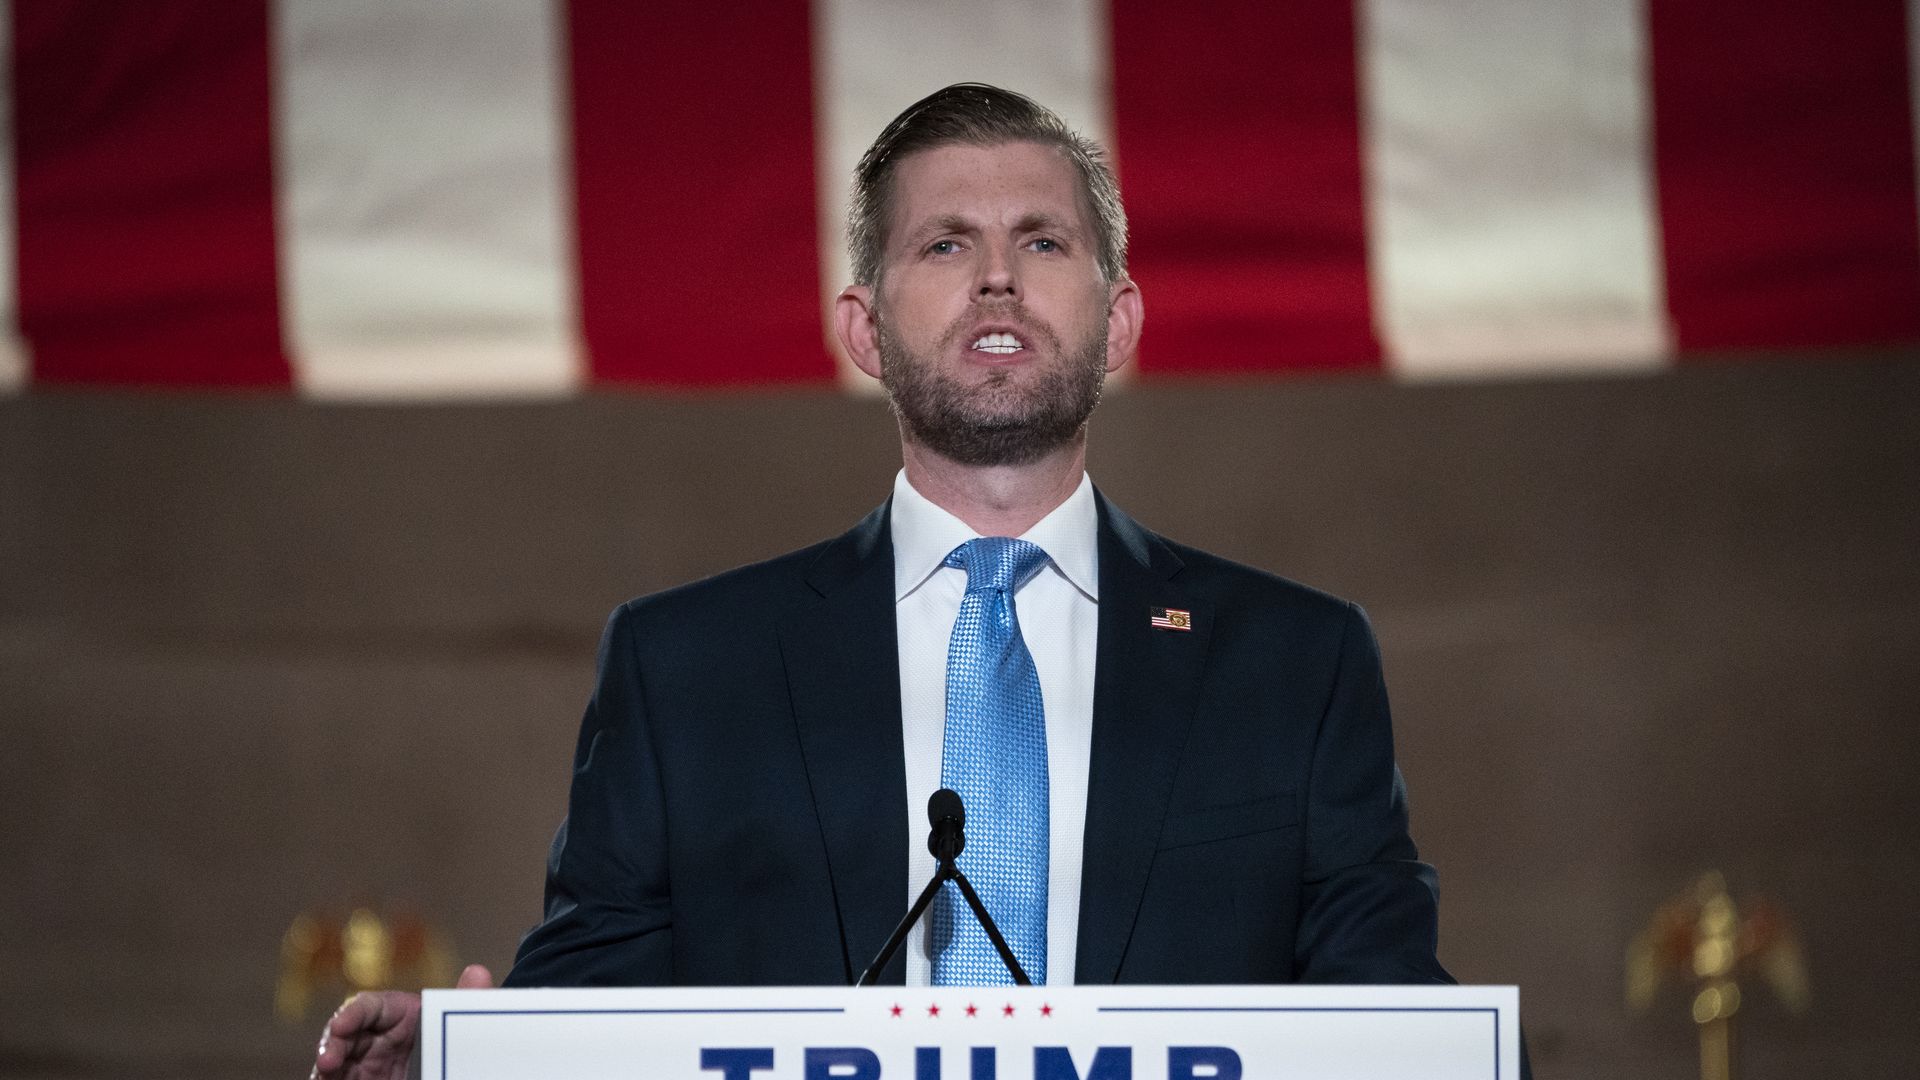 Eric Trump says his father ‘literally saved Christianity’ from ‘atheist Democrats who want to close churches’